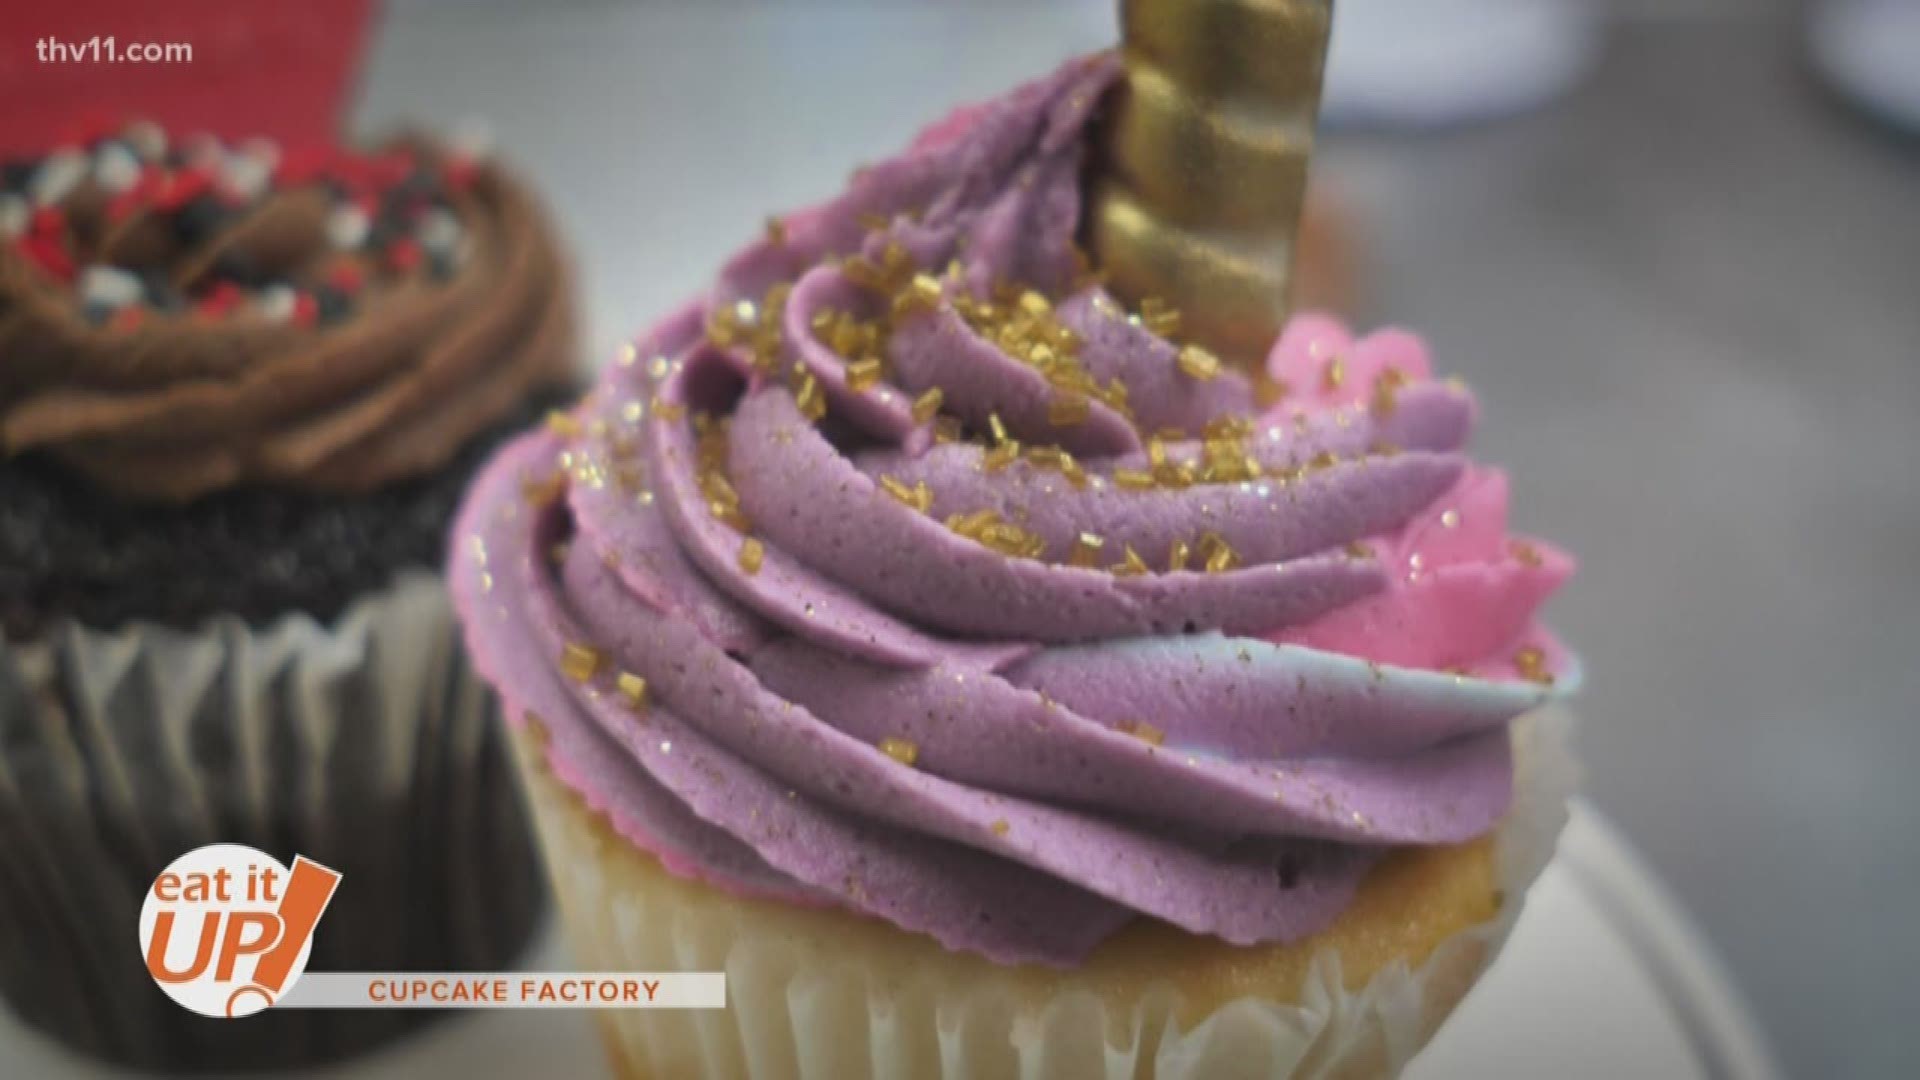 Cupcake Factory is located in west Little Rock.